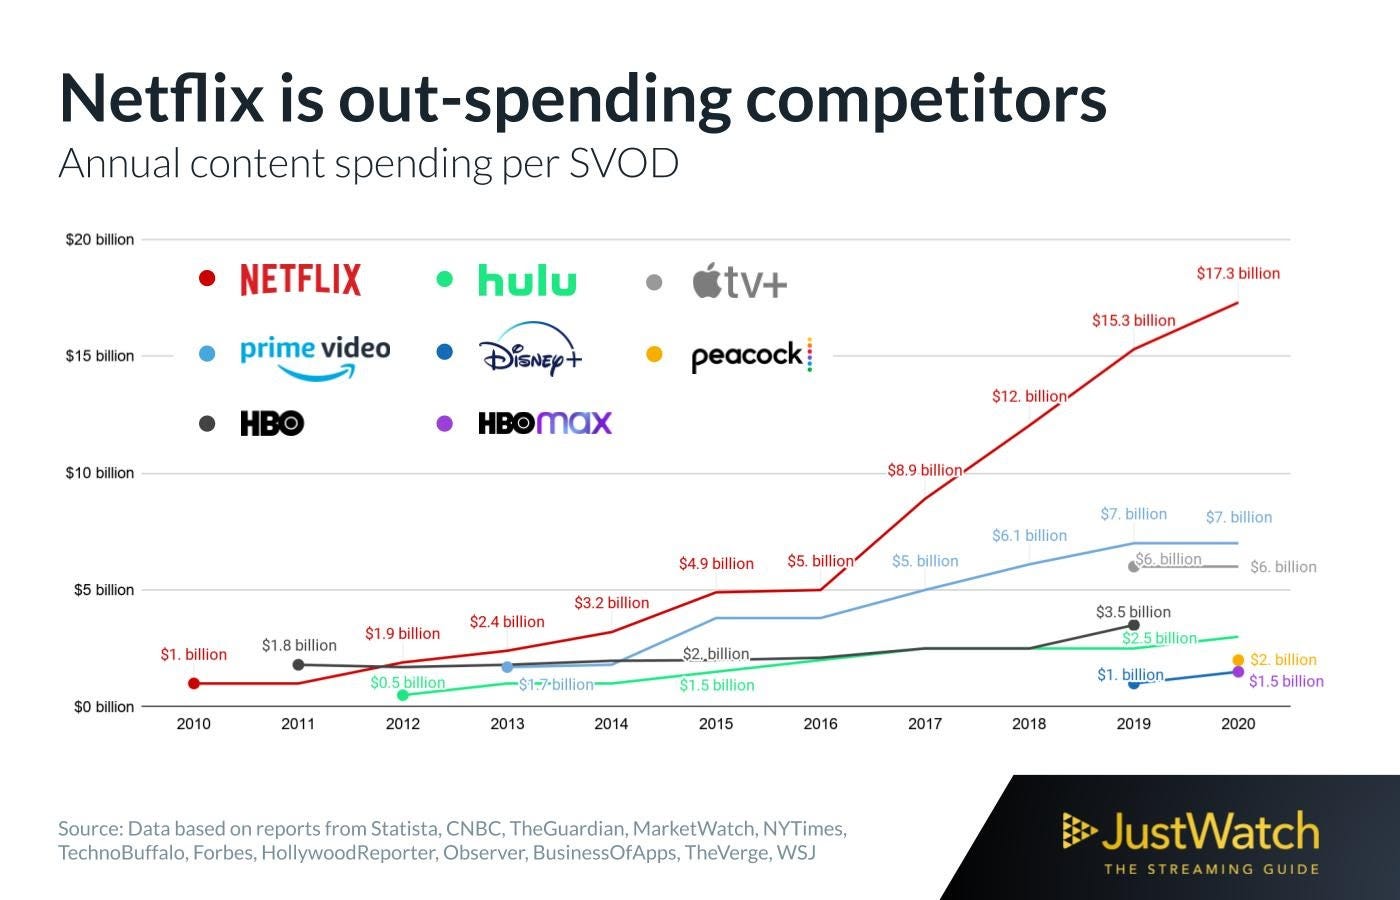 Netflix is out spending competitors more than two to one